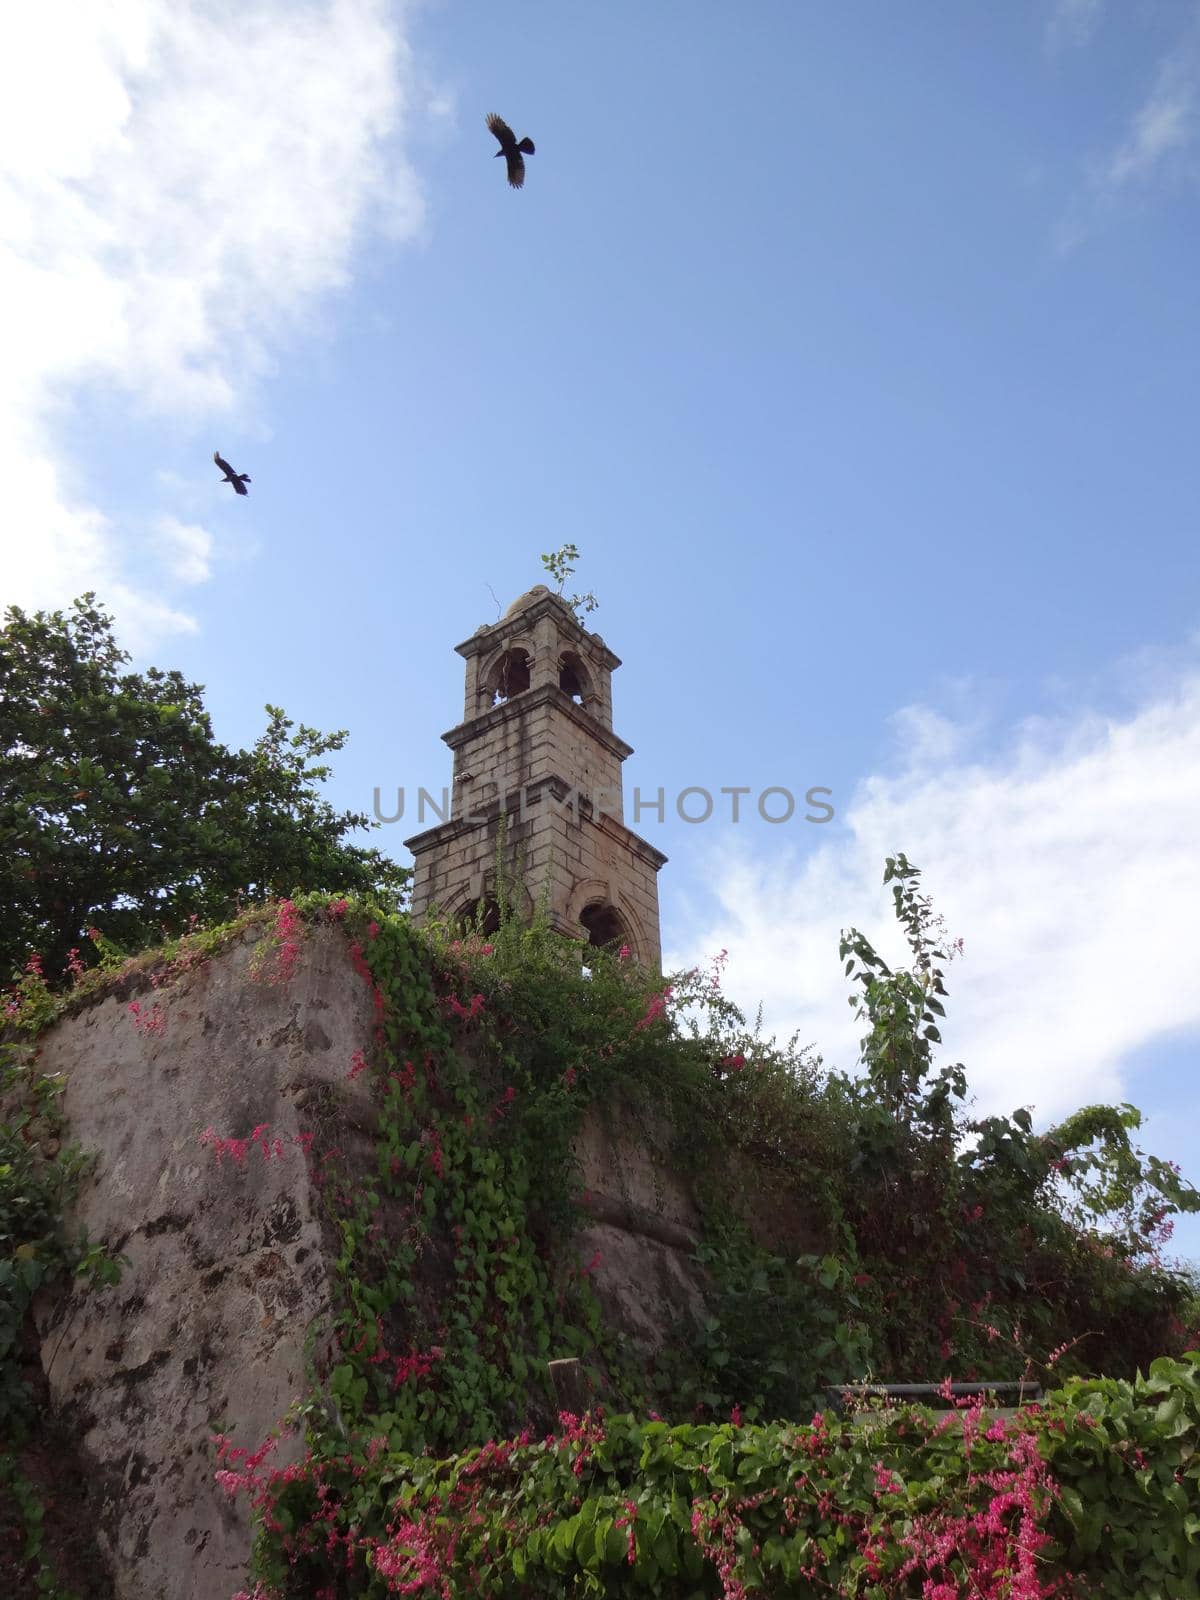 Tower of the abandoned Negombo fort, Sri Lanka by Capos